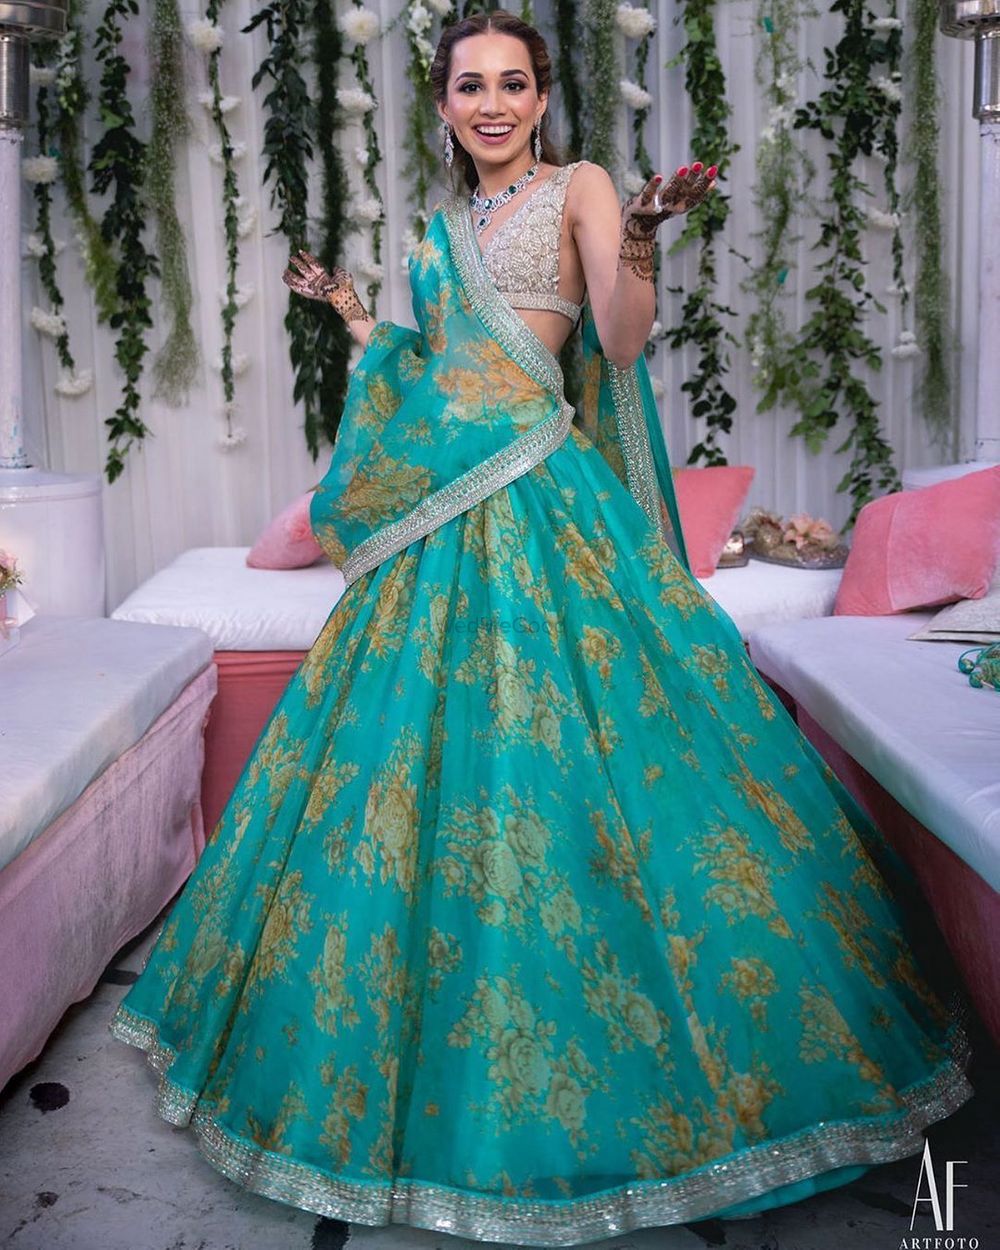 Photo of Bride wearing a printed lehenga with a plunging neck blouse.